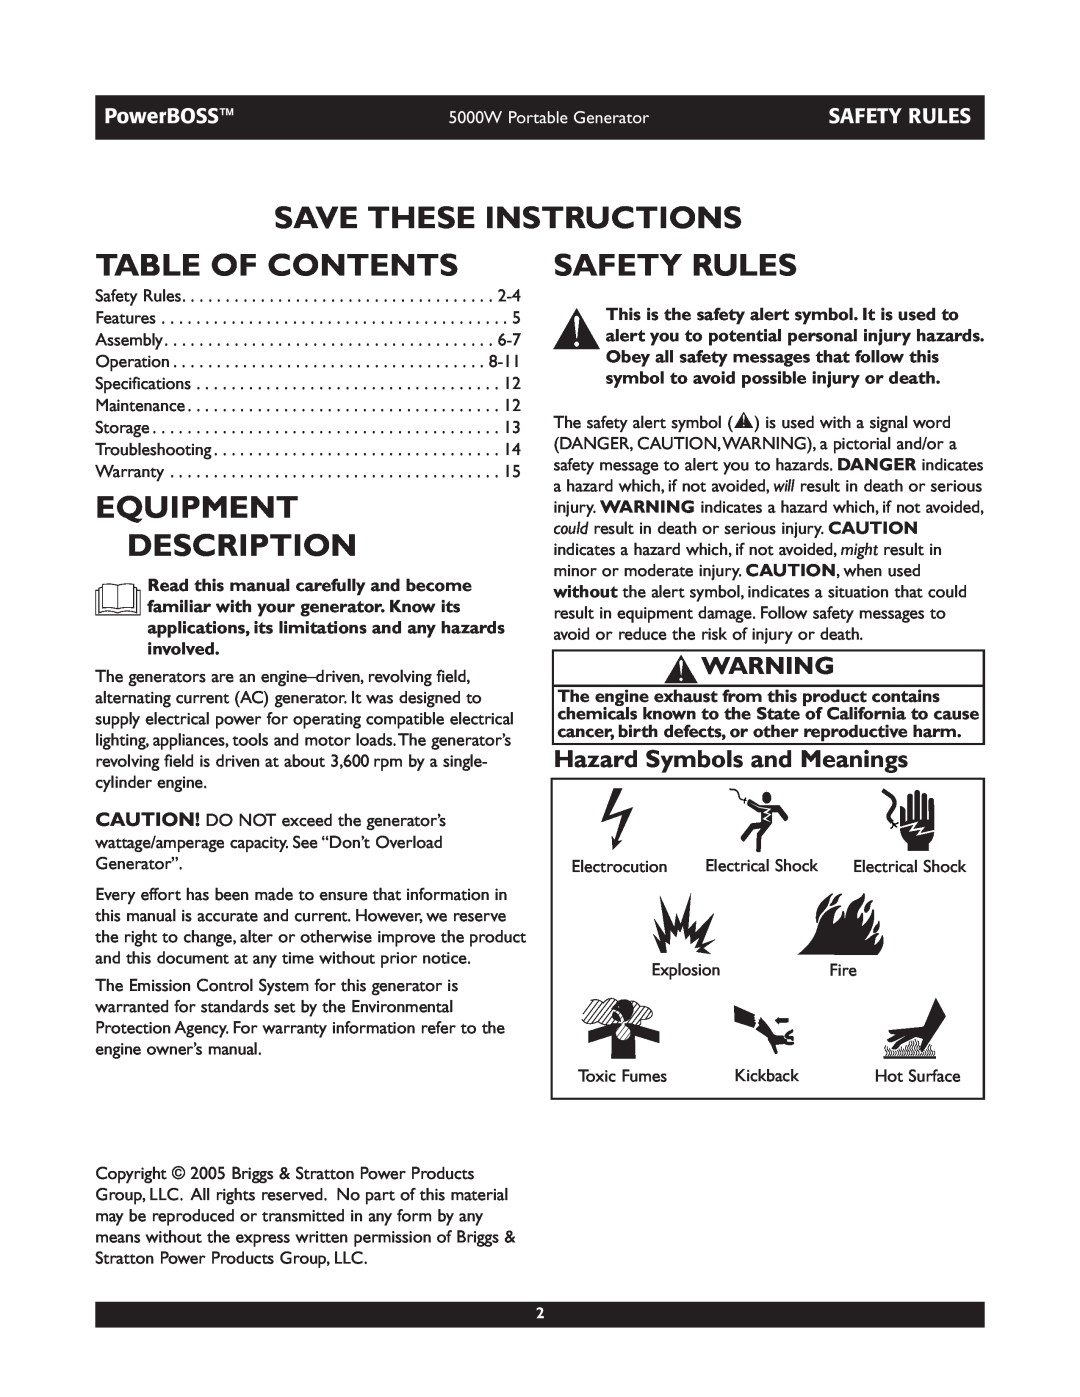 Briggs & Stratton 030222 Save These Instructions, Table Of Contents, Equipment Description, Safety Rules, PowerBOSS 